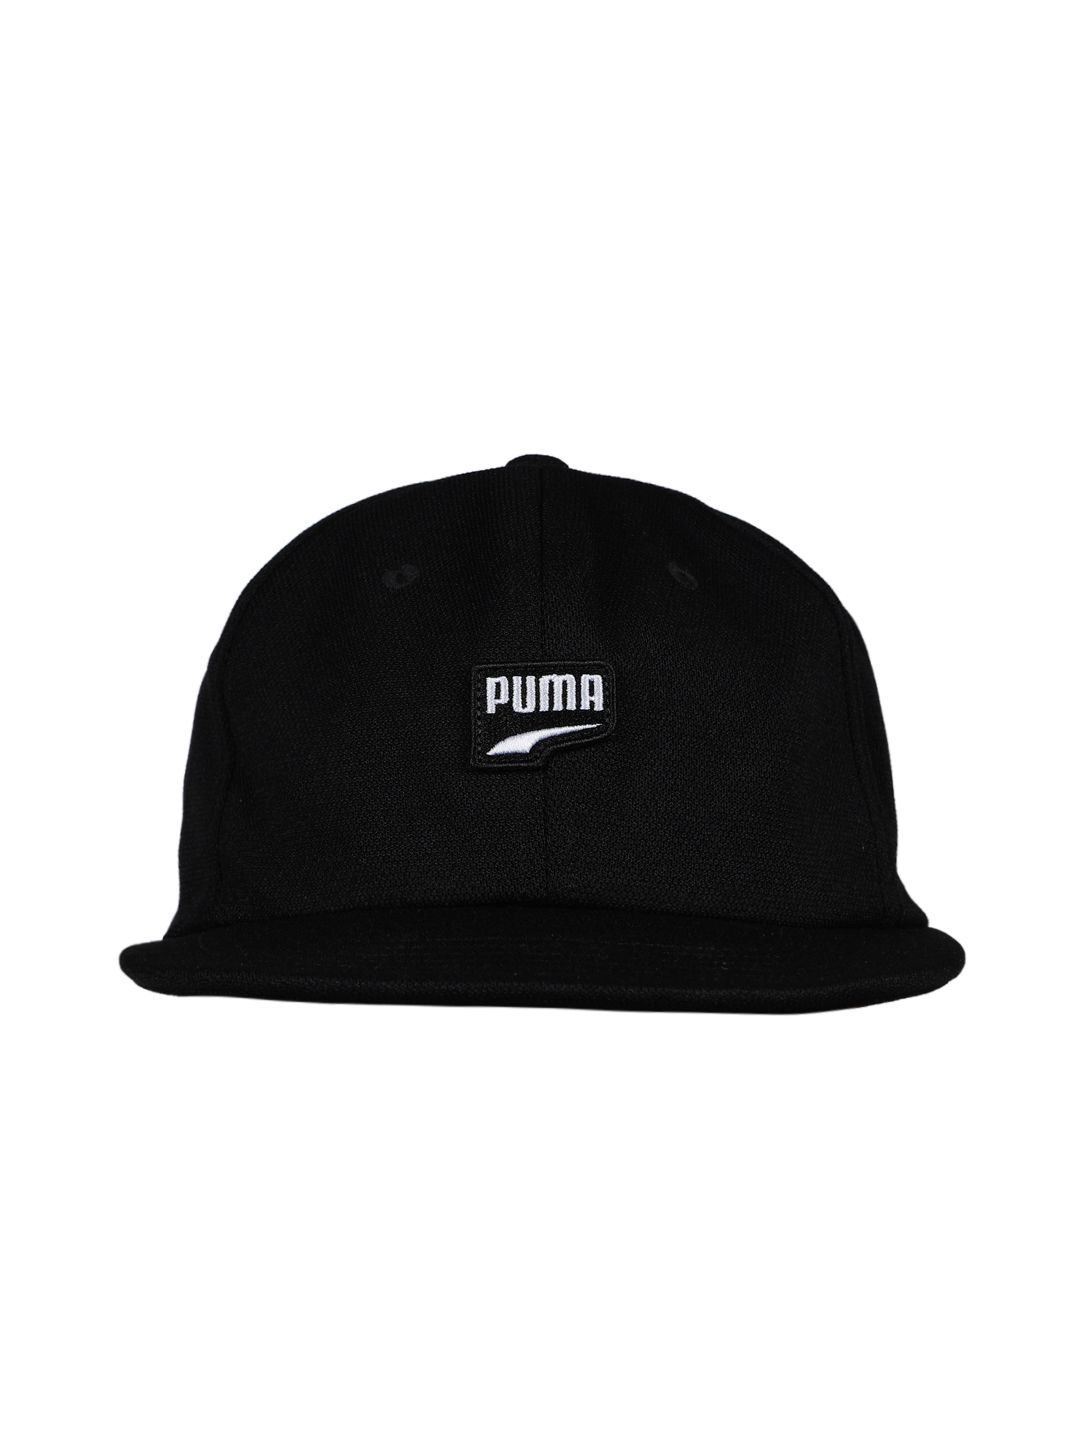 Puma Unisex Black Solid Archive Downtown FB Baseball Cap Price in India